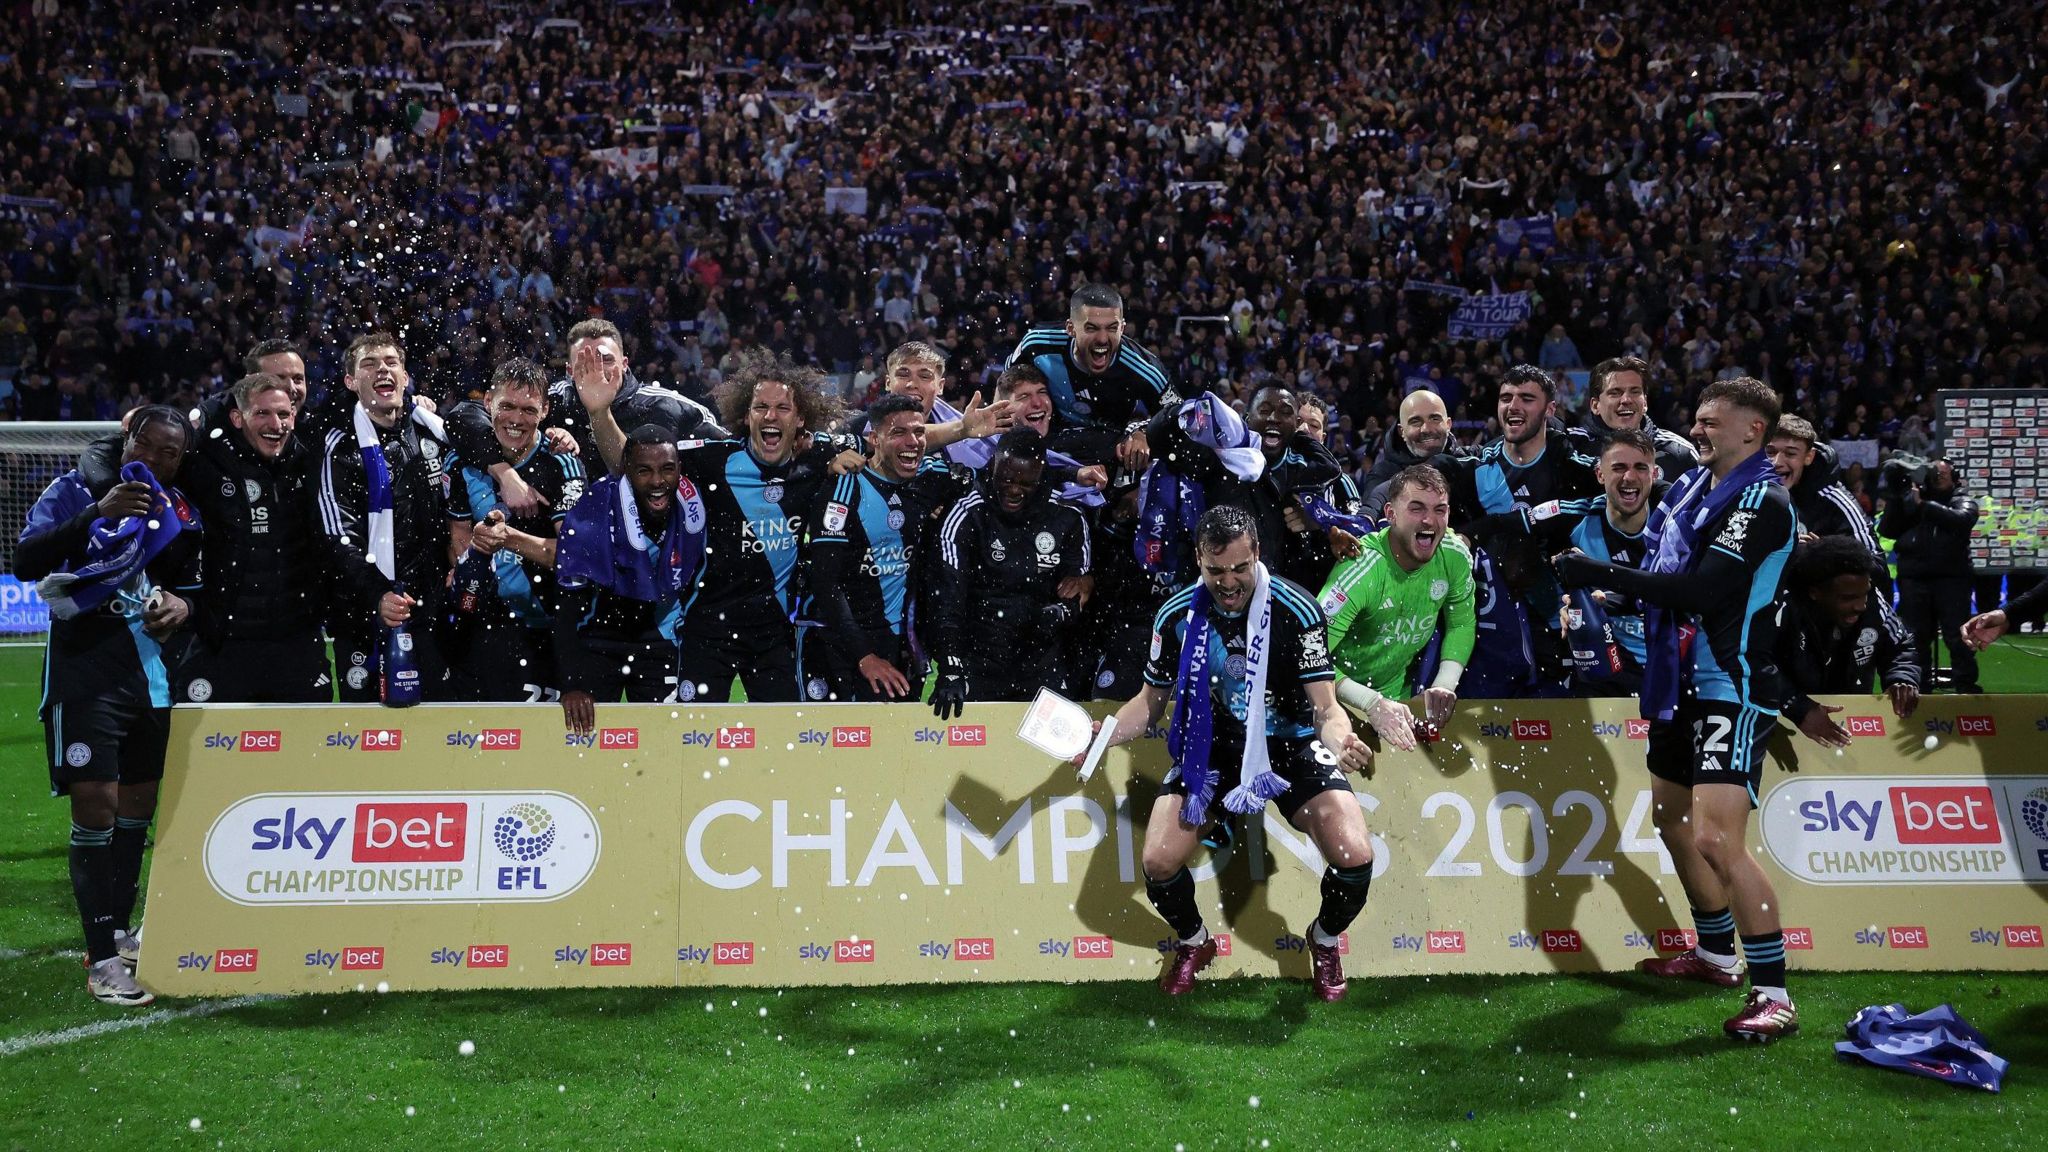 Leicester celebrate winning the Championship title